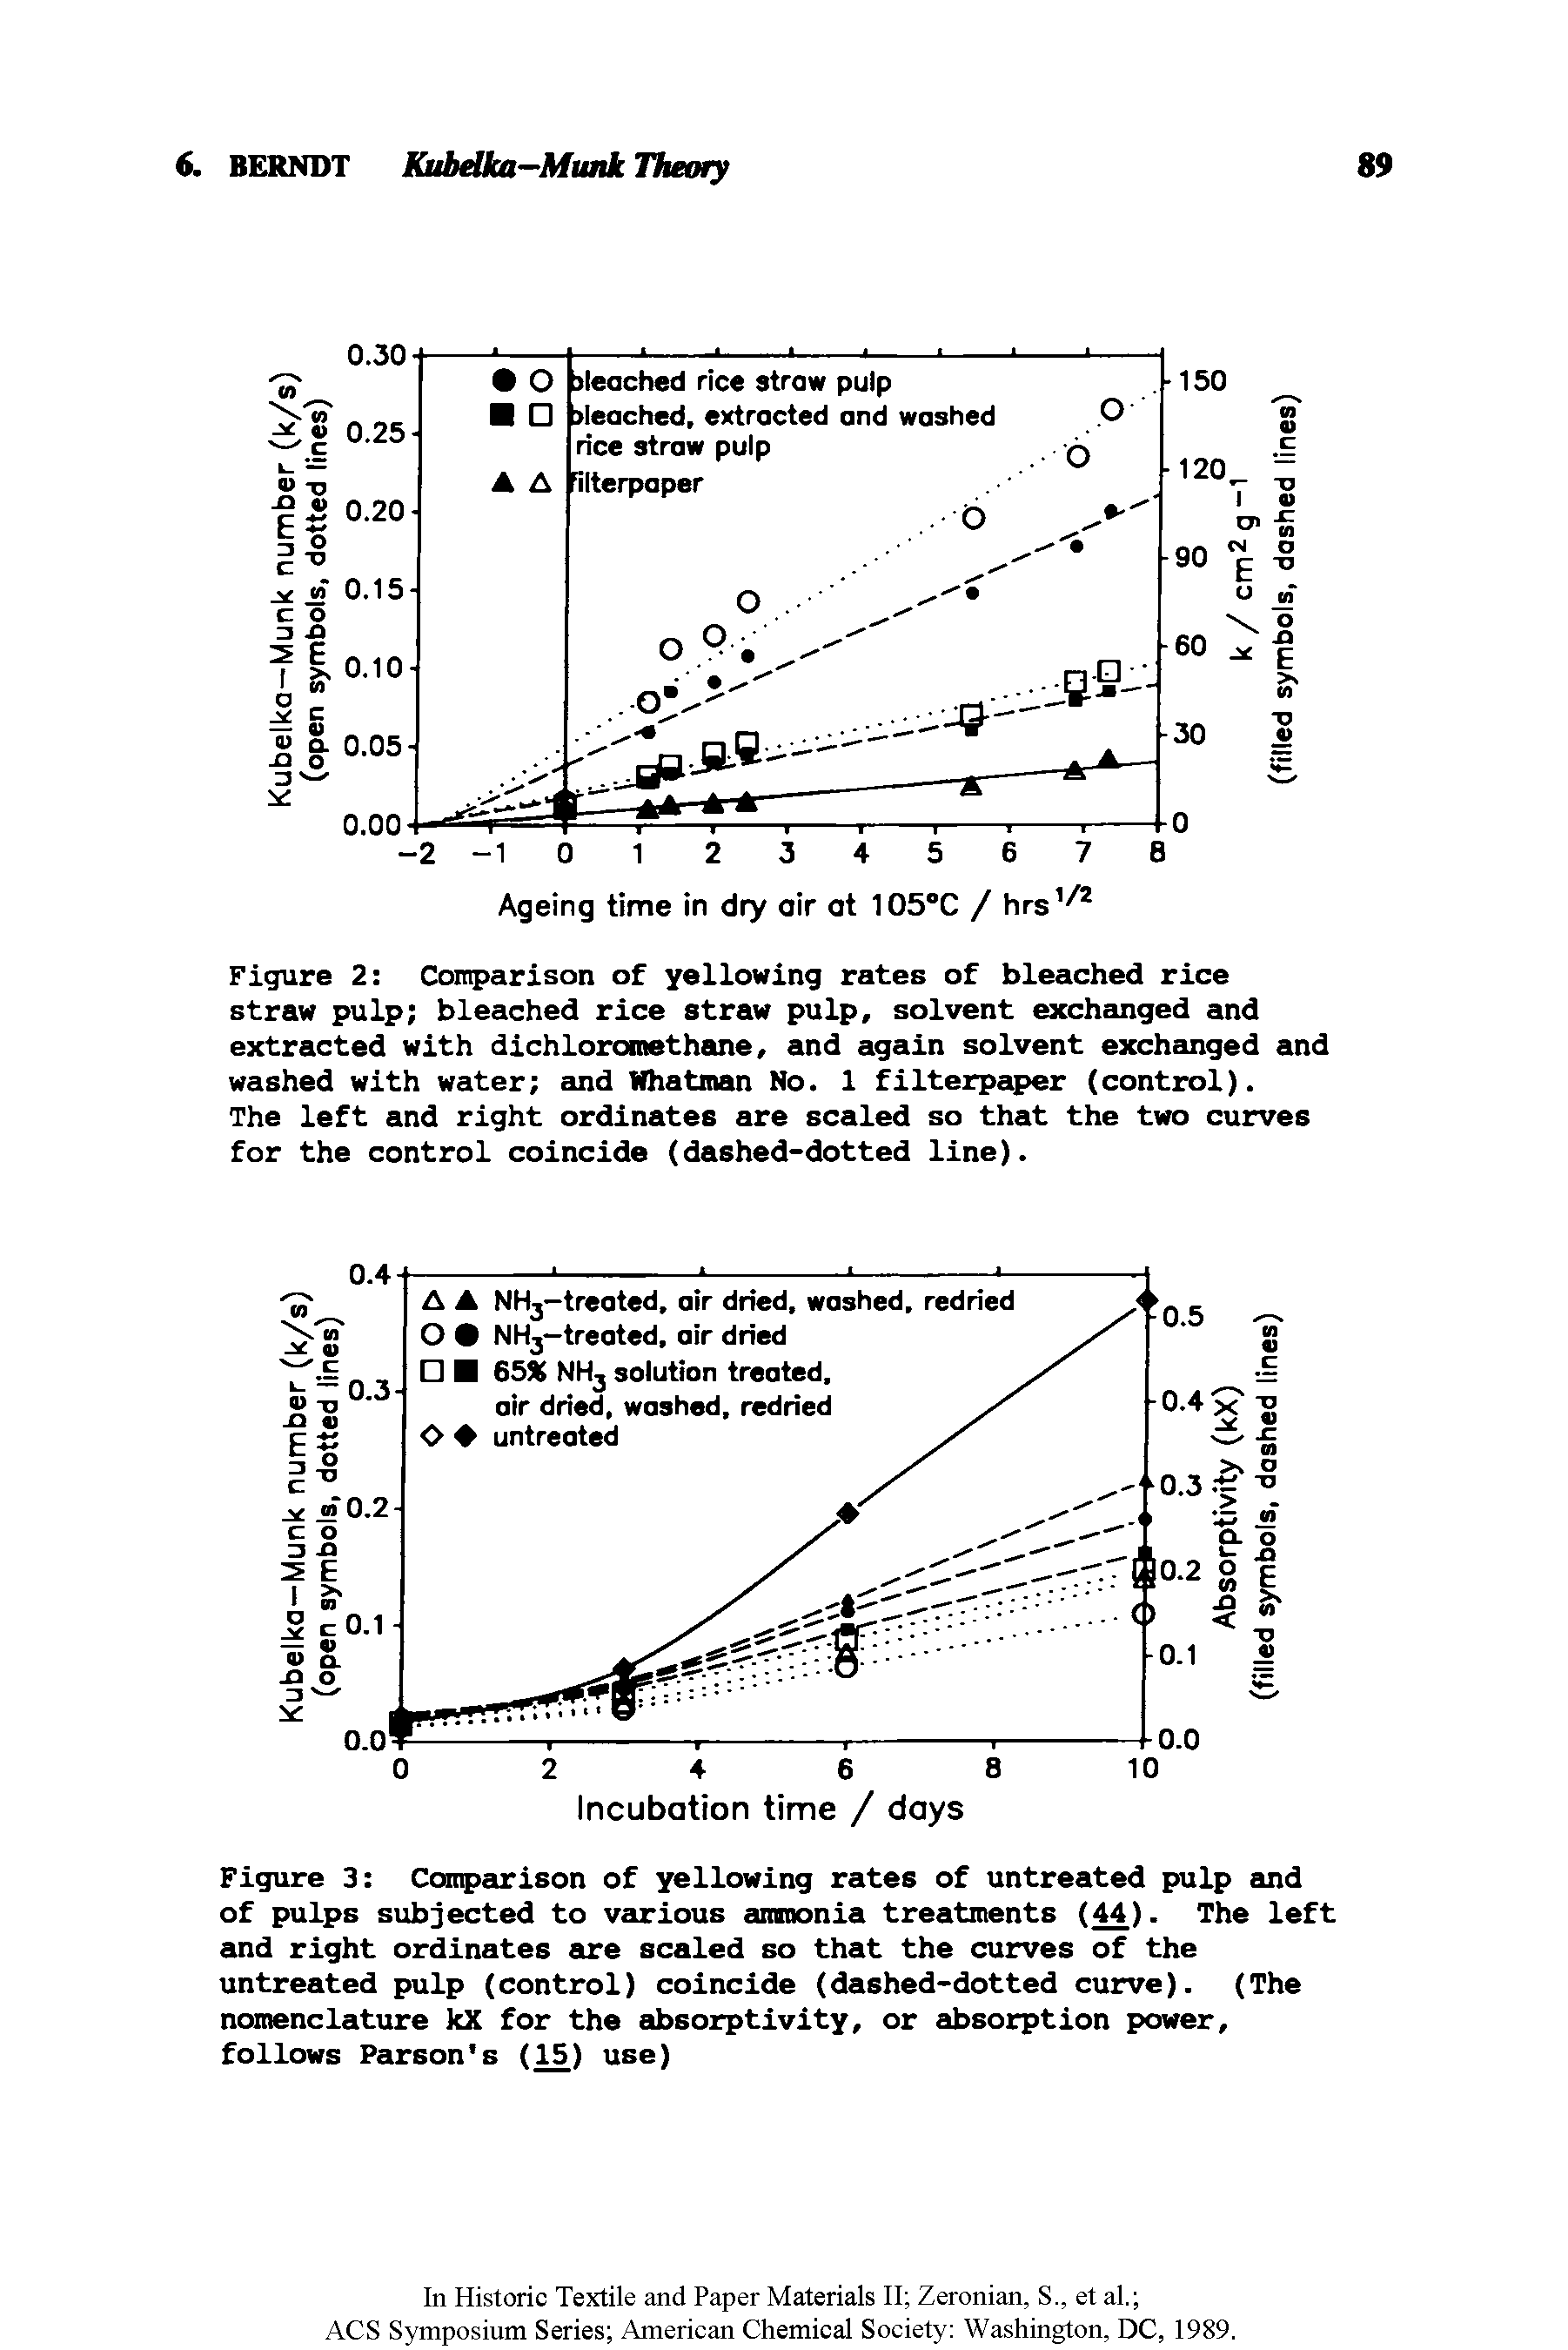 Figure 3 Comparison of yellowing rates of untreated pulp and of pulps subjected to various ammonia treatments (44). The left and right ordinates are scaled so that the curves of the untreated pulp (control) coincide (dashed-dotted curve). (The nomenclature kX for the absorptivity, or absorption power, follows Parson s (15) use)...